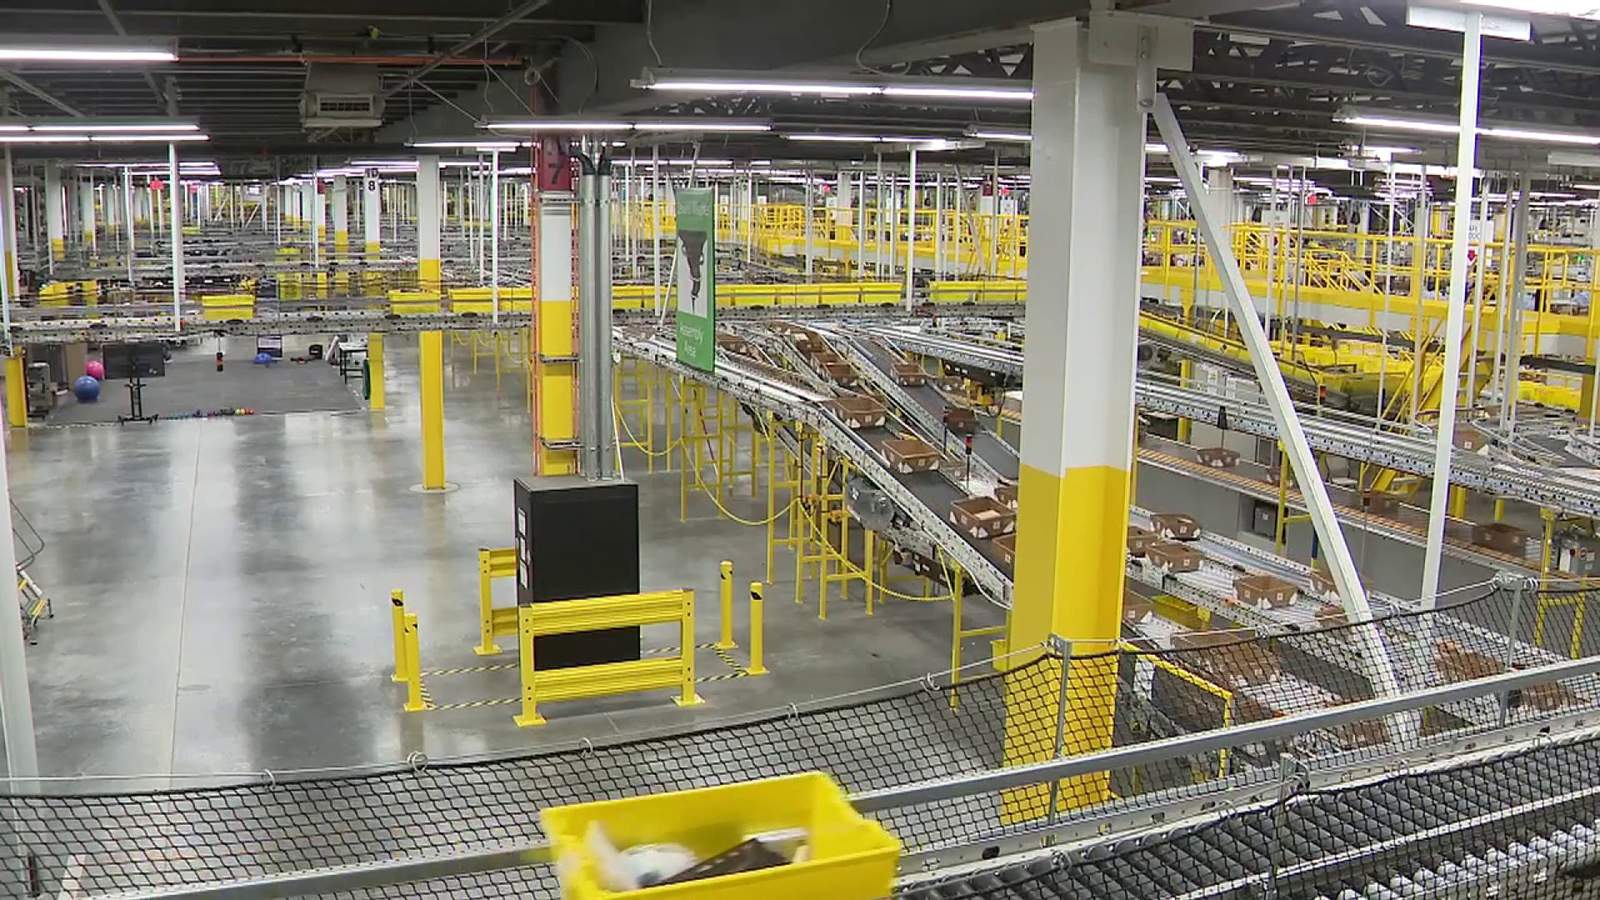 Local Amazon fulfillment facility at full-speed on Cyber Monday